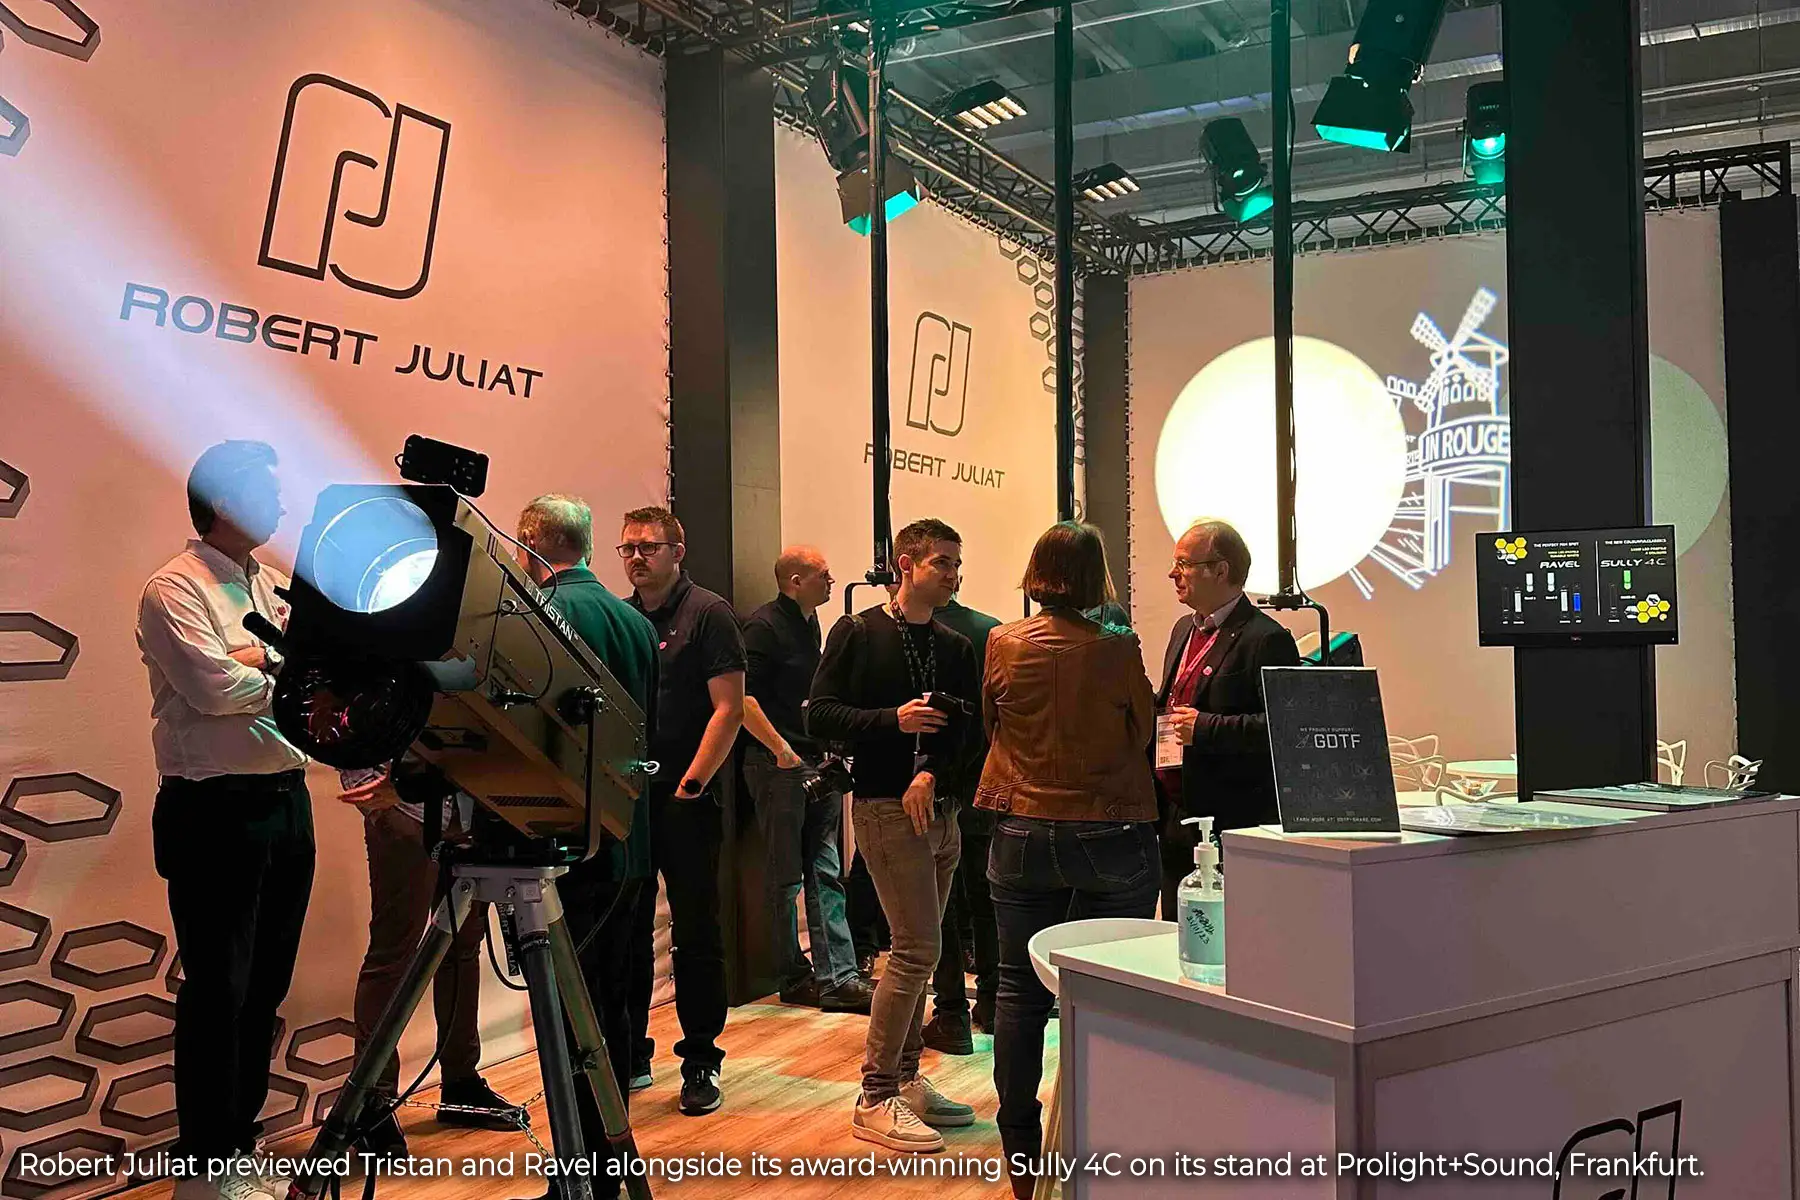 Robert Juliat previewed Tristan and Ravel alongside its award-winning Sully 4C on its stand at Prolight+Sound, Frankfurt